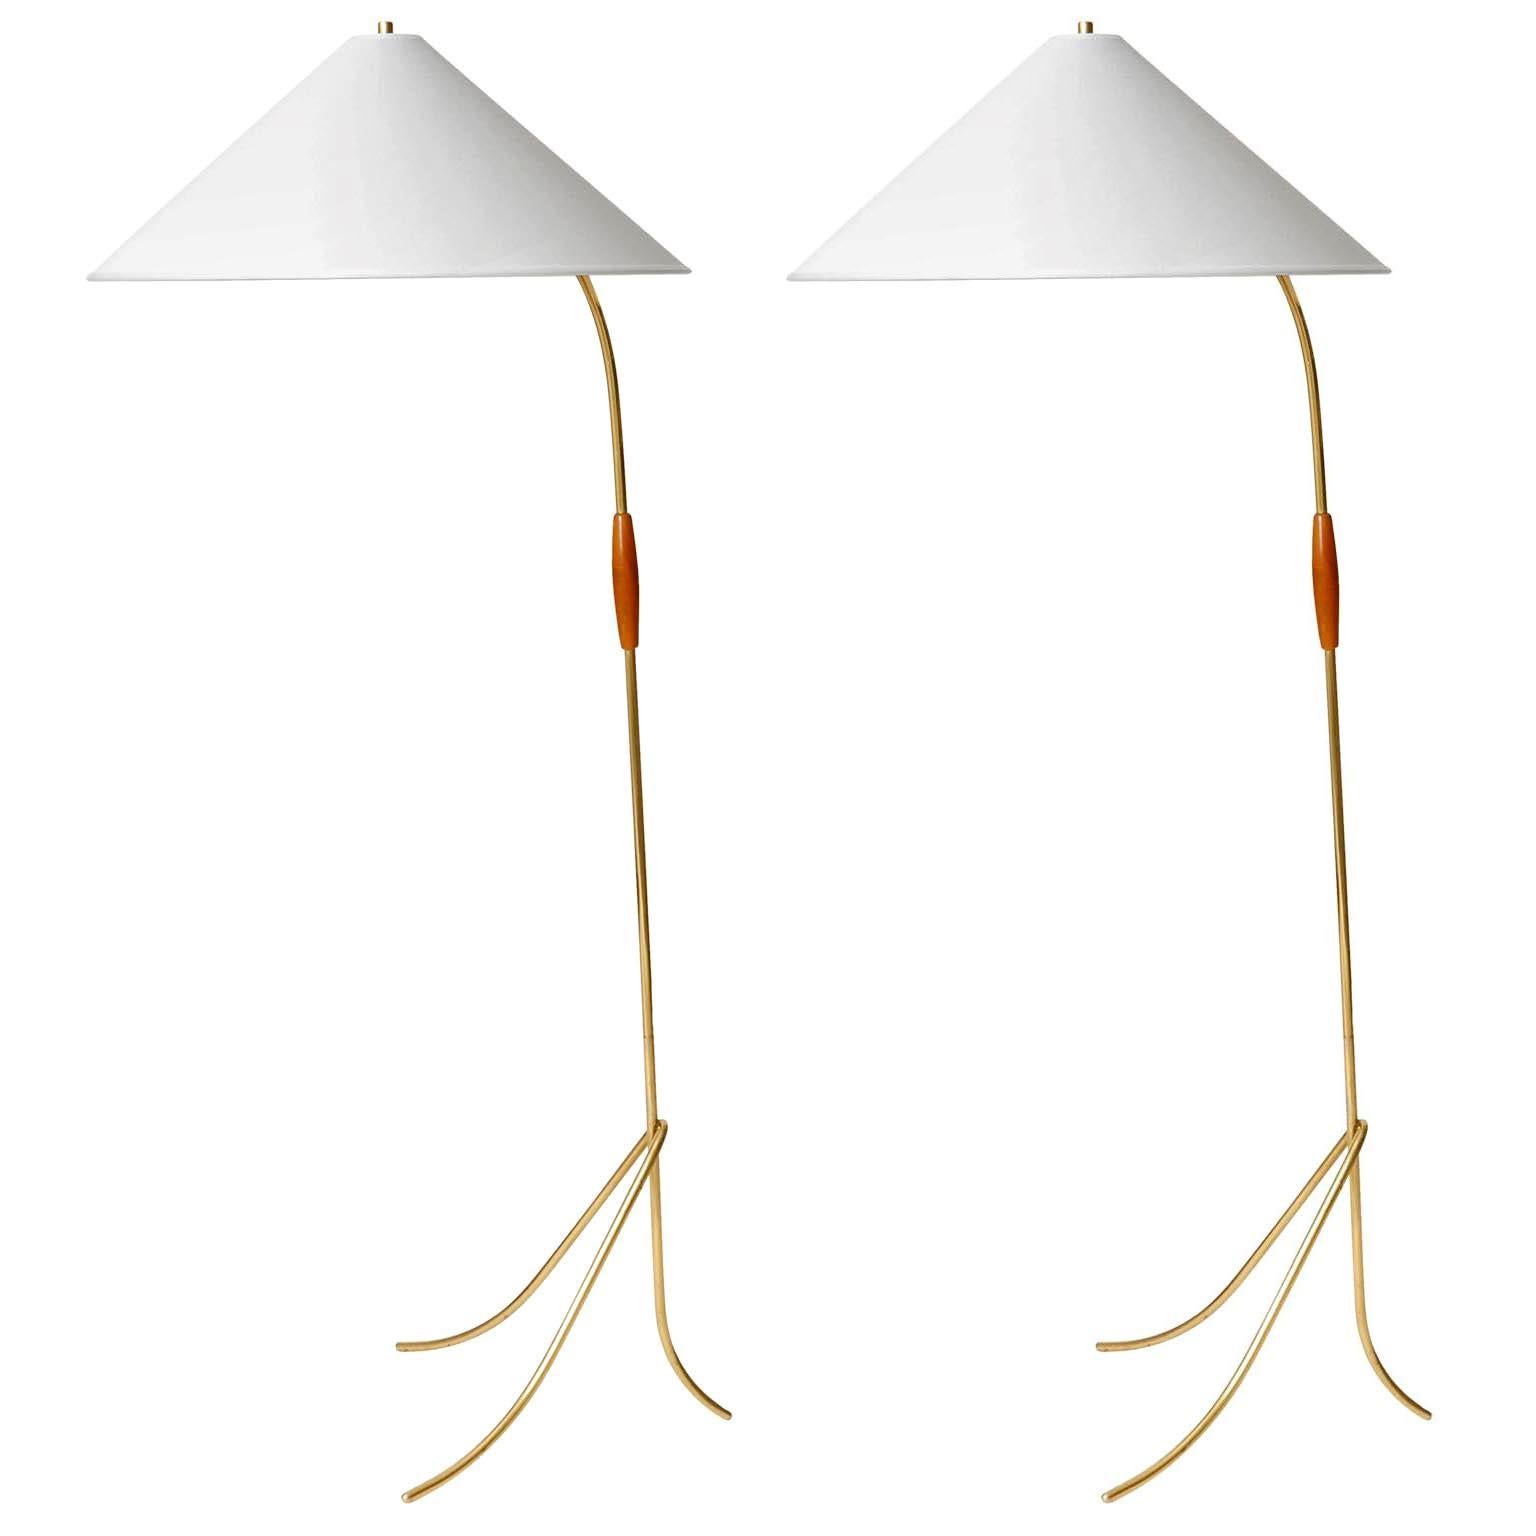 One of two gorgeous floor lights by Rupert Nikoll, Austria, manufactured in midcentury, circa 1960 (late 1950s or early 1960s).
The light is very similar to the floor lamp model 'Hase' (engl. rabbit) designed by J.T. Kalmar.
A white textile lamp